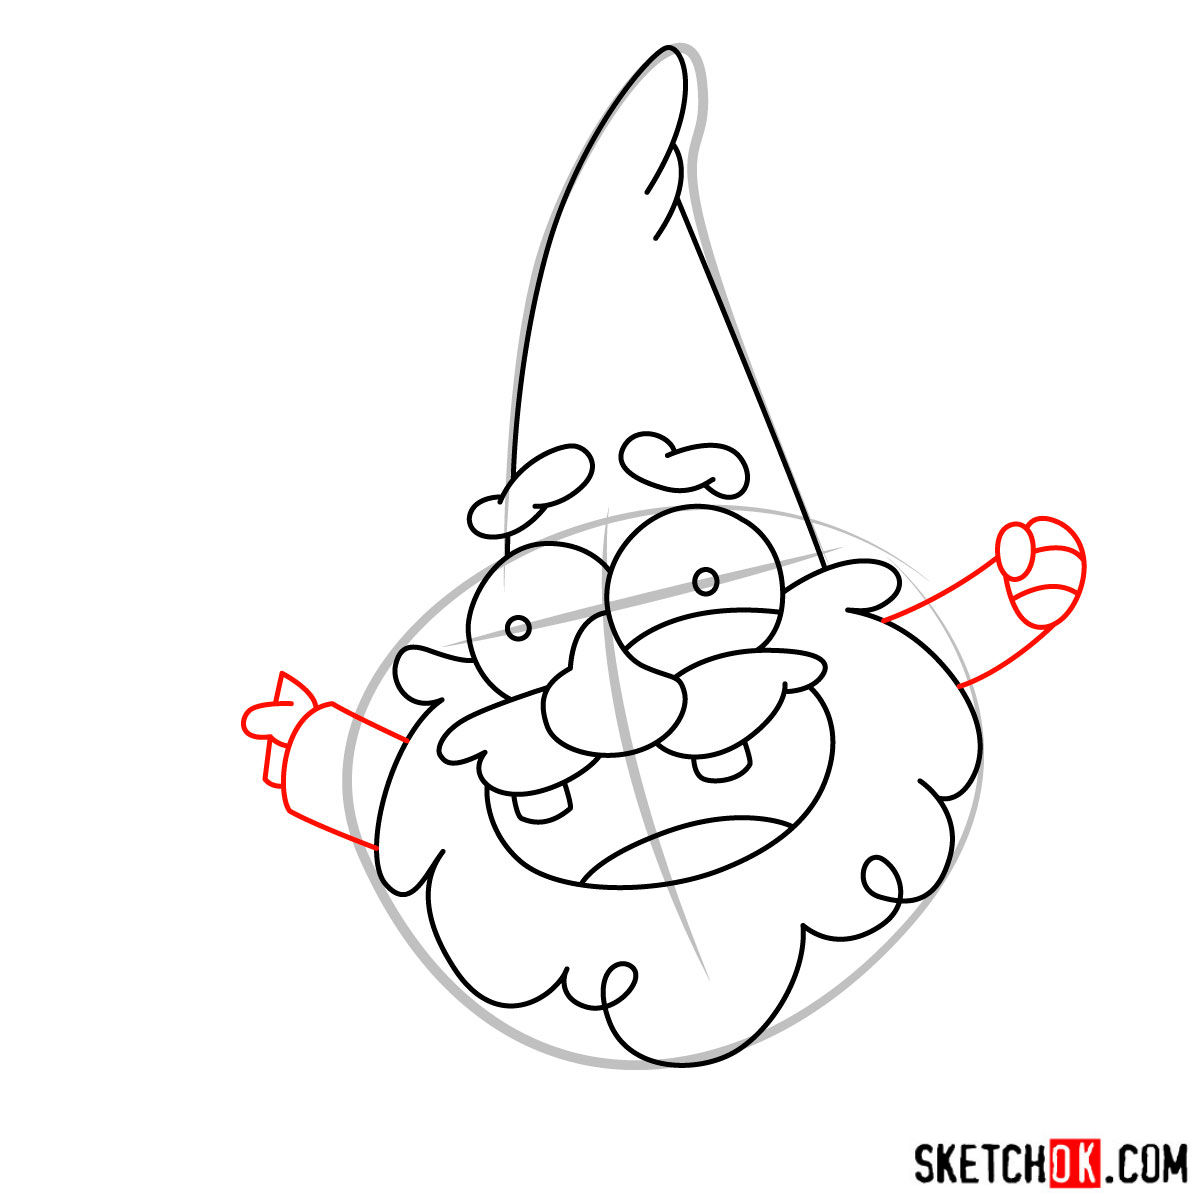 How to draw Gnome from Gravity Falls - step 06